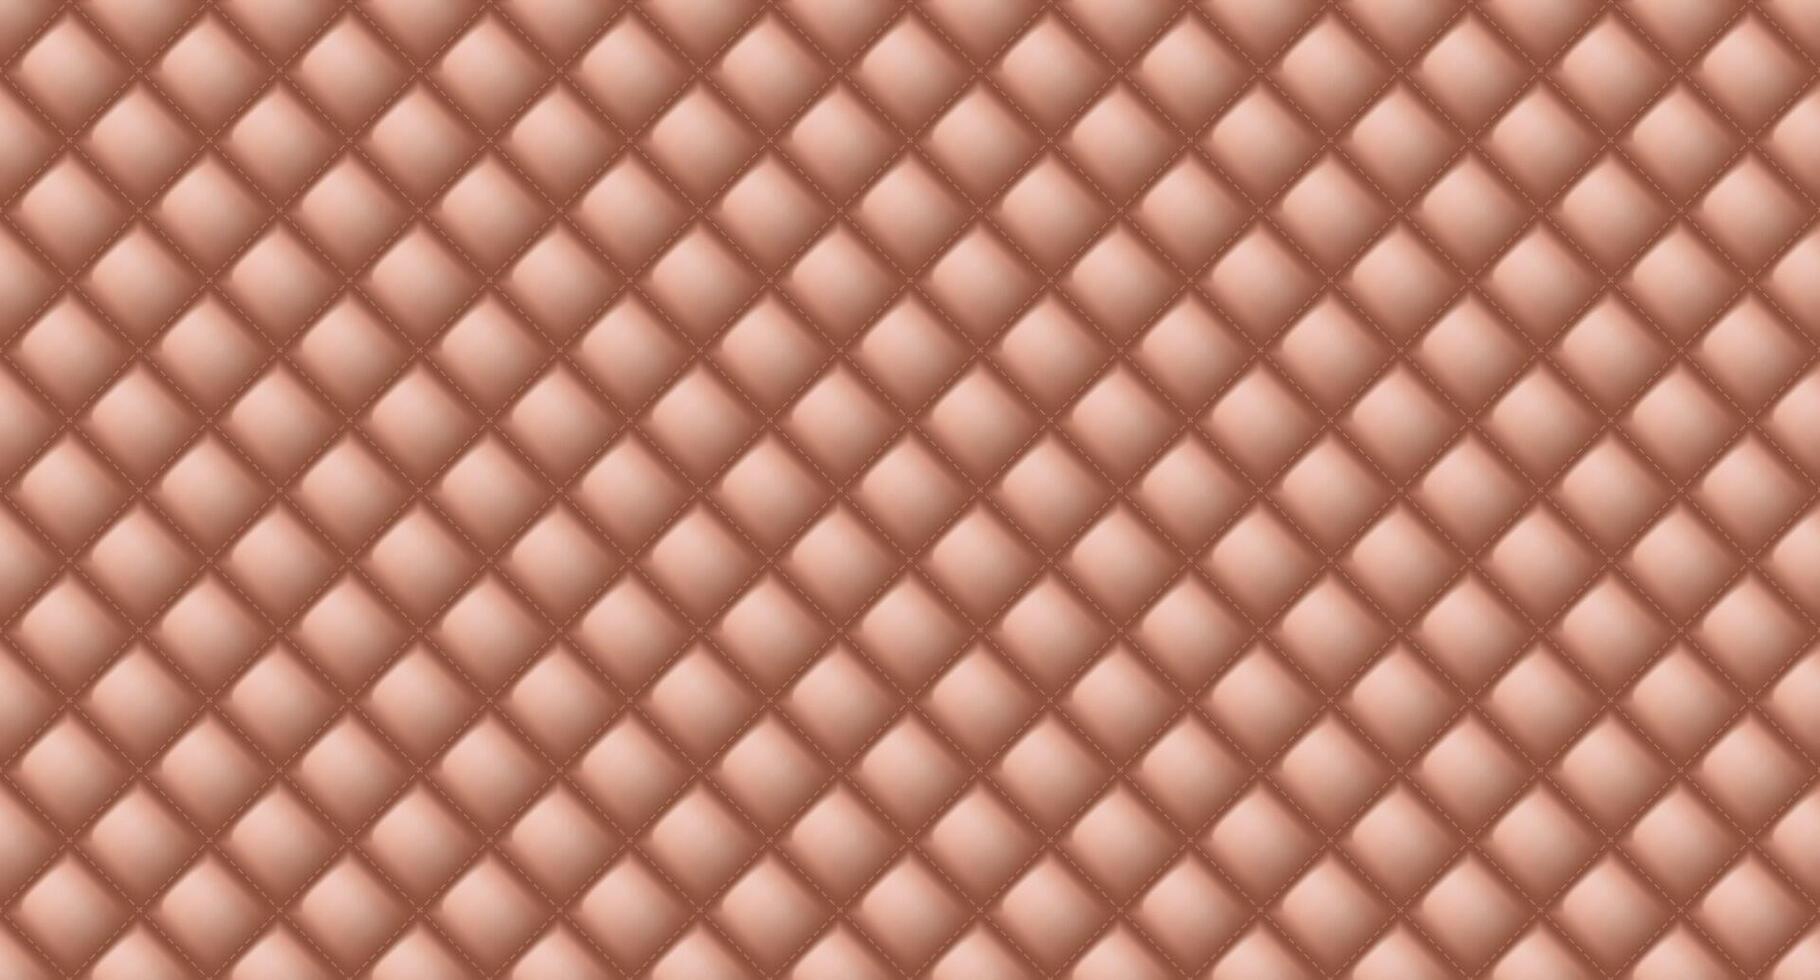 Simple upholstery quilted background. Quilted stitched background pattern. Brown leather texture sofa backdrop. Seamless texture quilted background vector